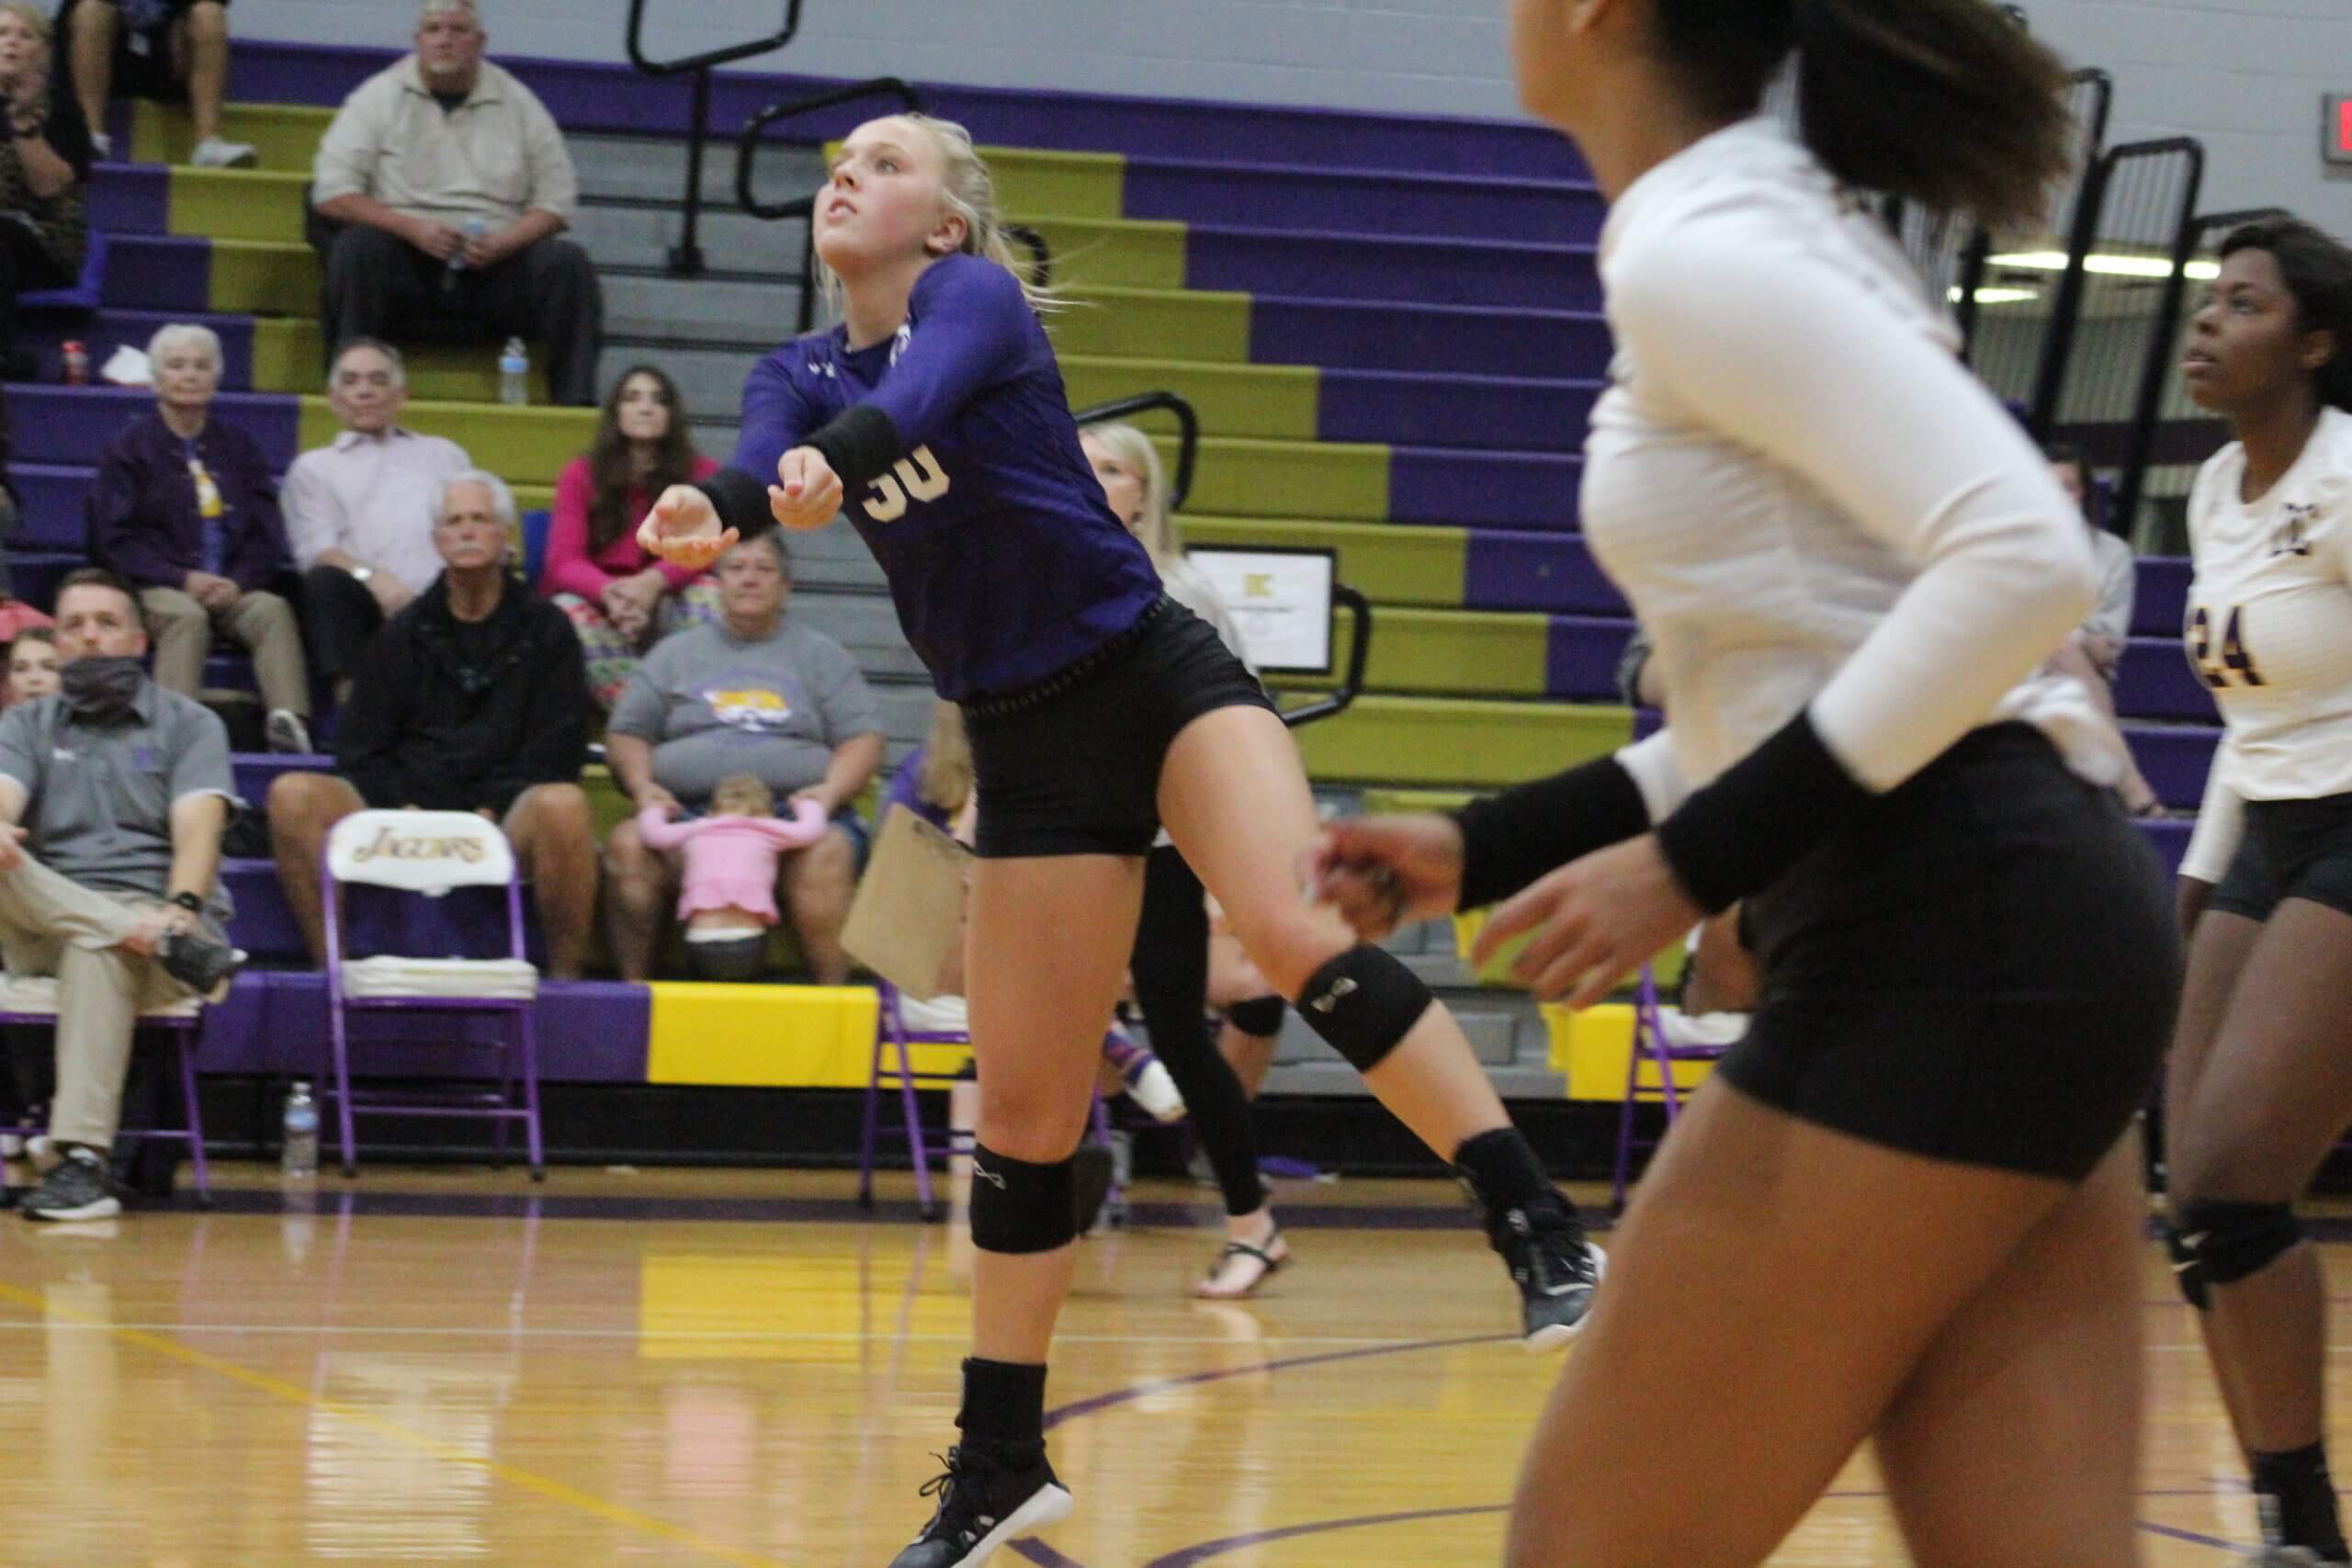 Division volleyball battle goes to Lady Jags